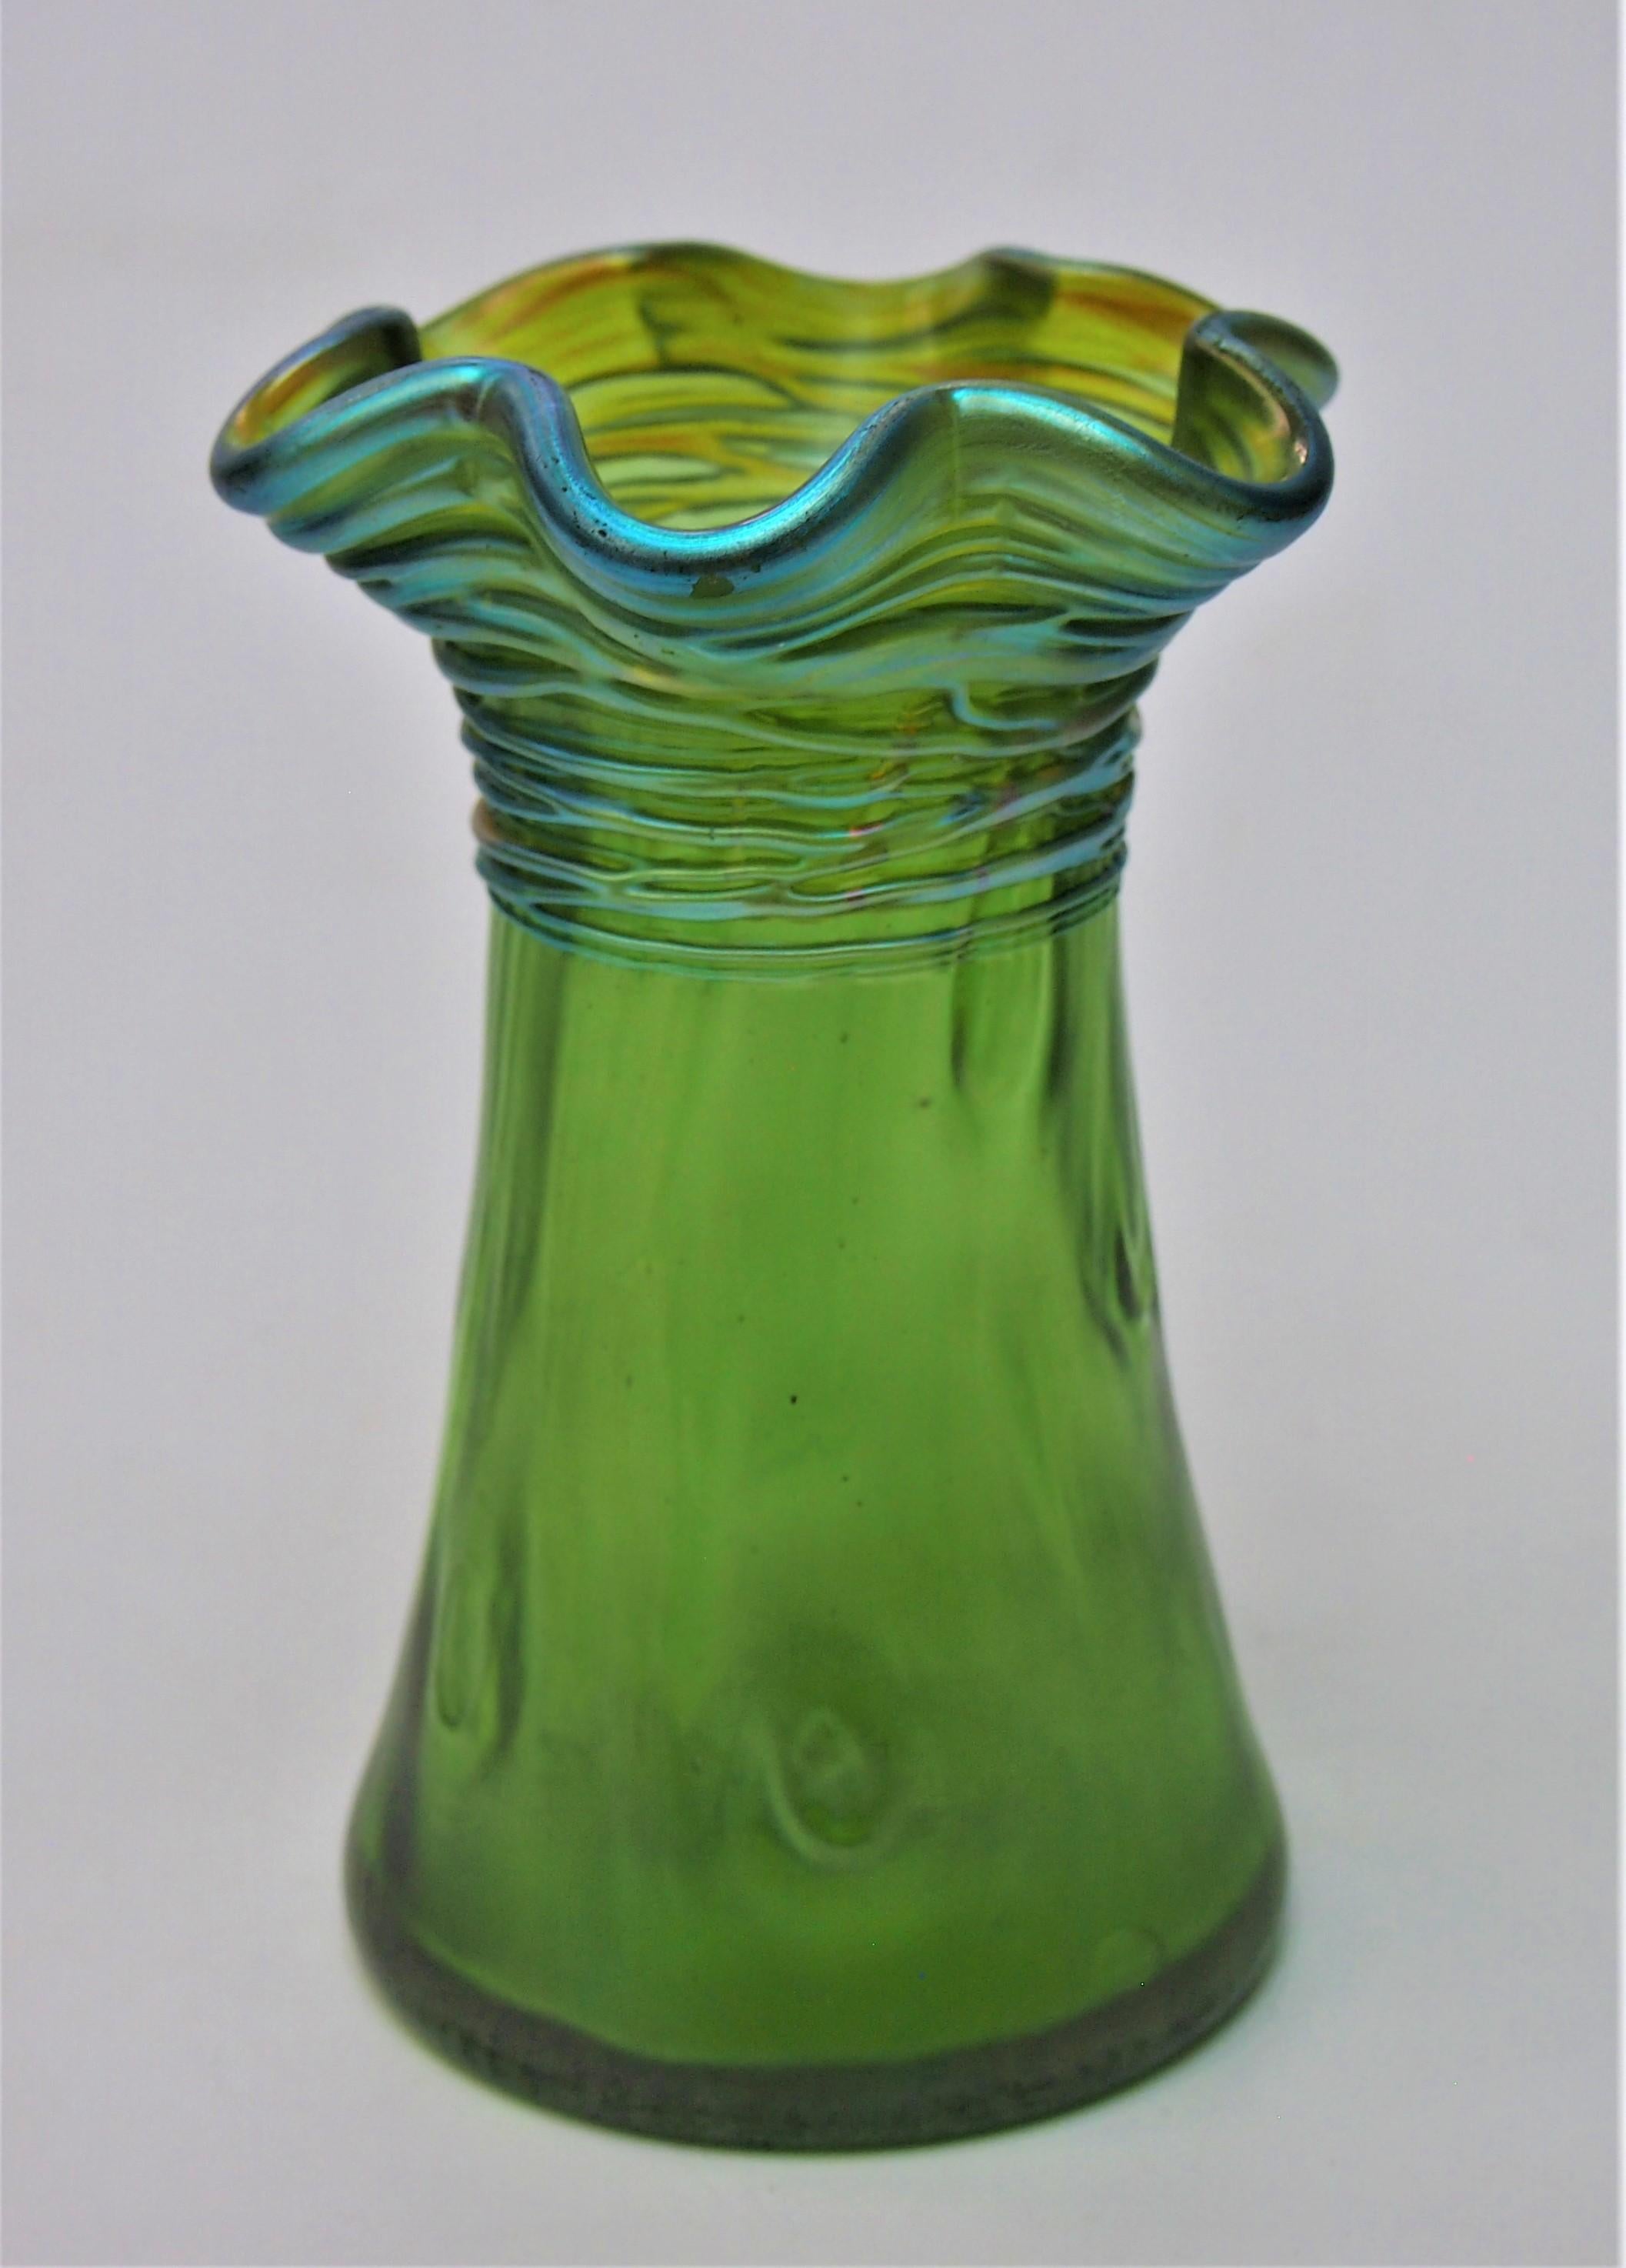 A fabulous Art Nouveau Loetz 'Crete' (green) Rusticana with Threads vase -Loetz. The Rusticana  décor (instantly recognised by the hand tooled wood knot - like body markings) is quite common, but the décor 'Rusticana with threads' which are hot